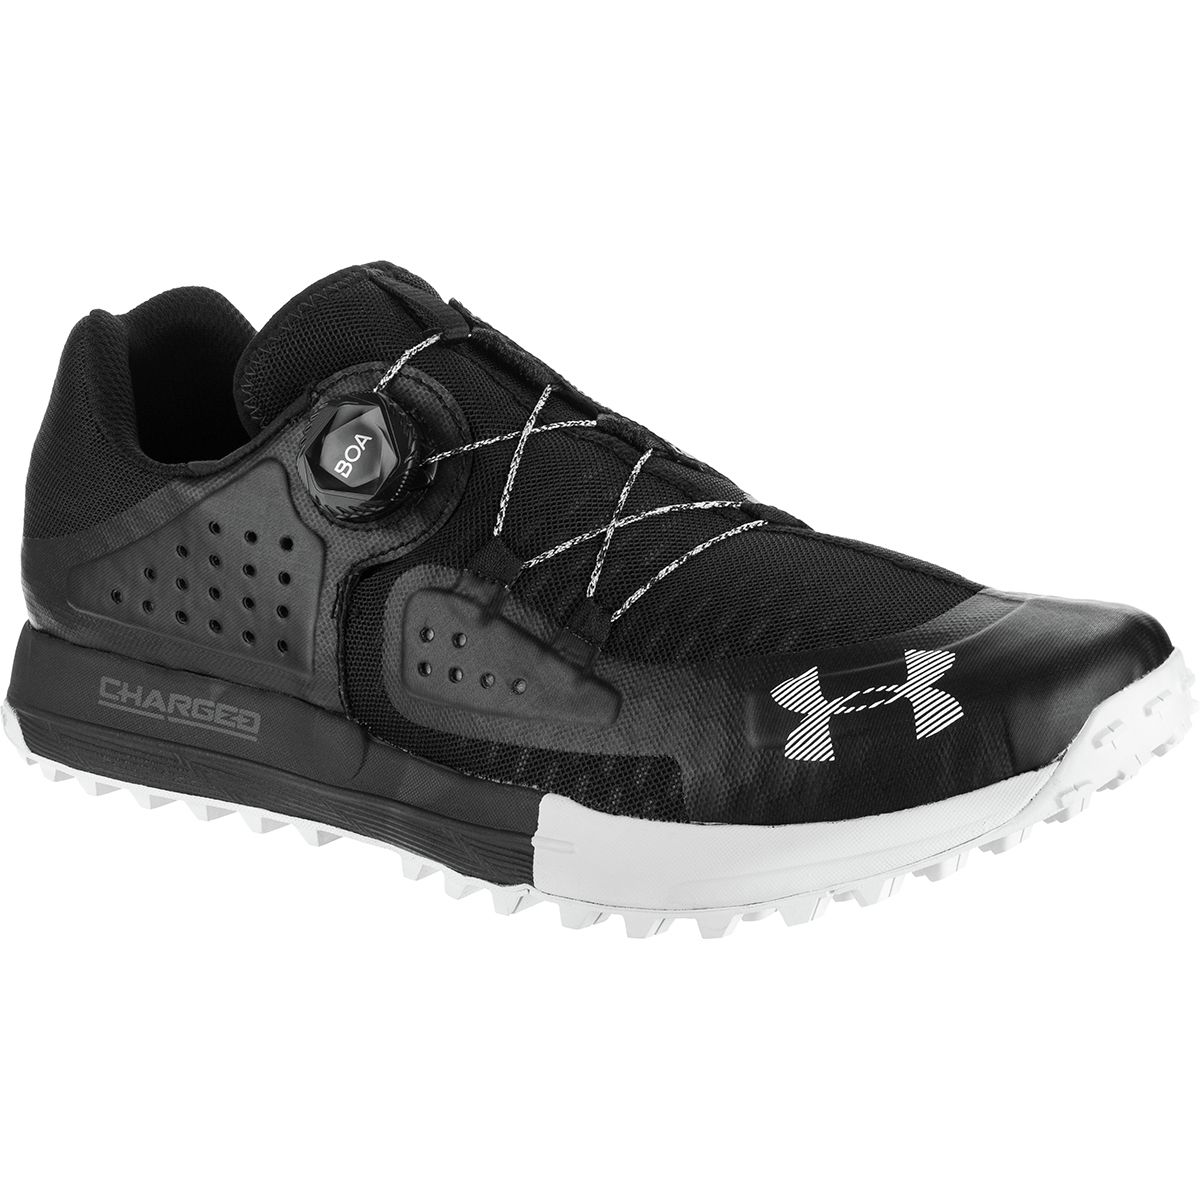 under armour syncline review